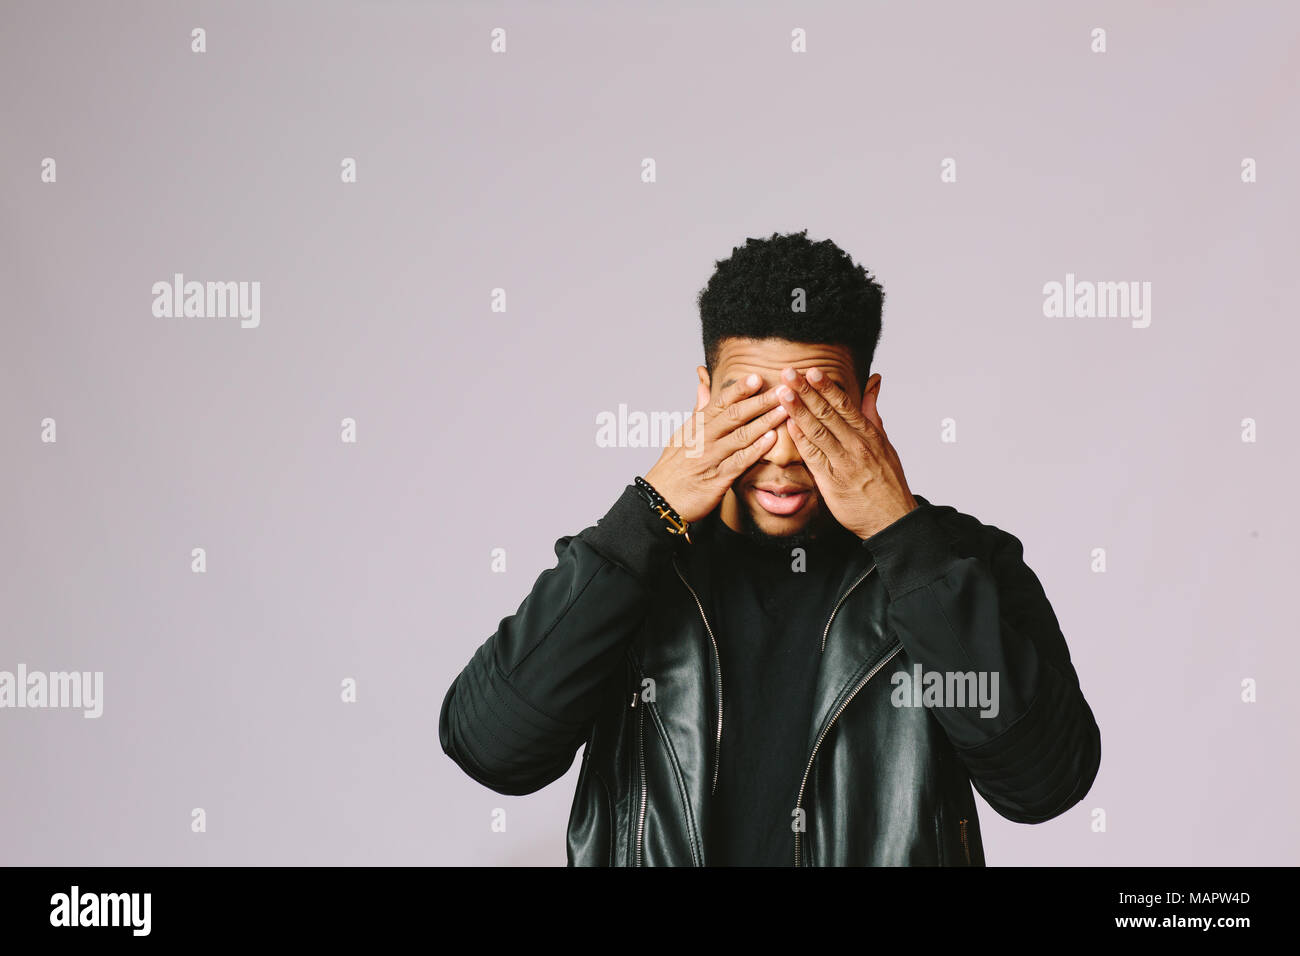 Portrait of a cool young man covering his eyes with both hands, isolated on studio background Stock Photo